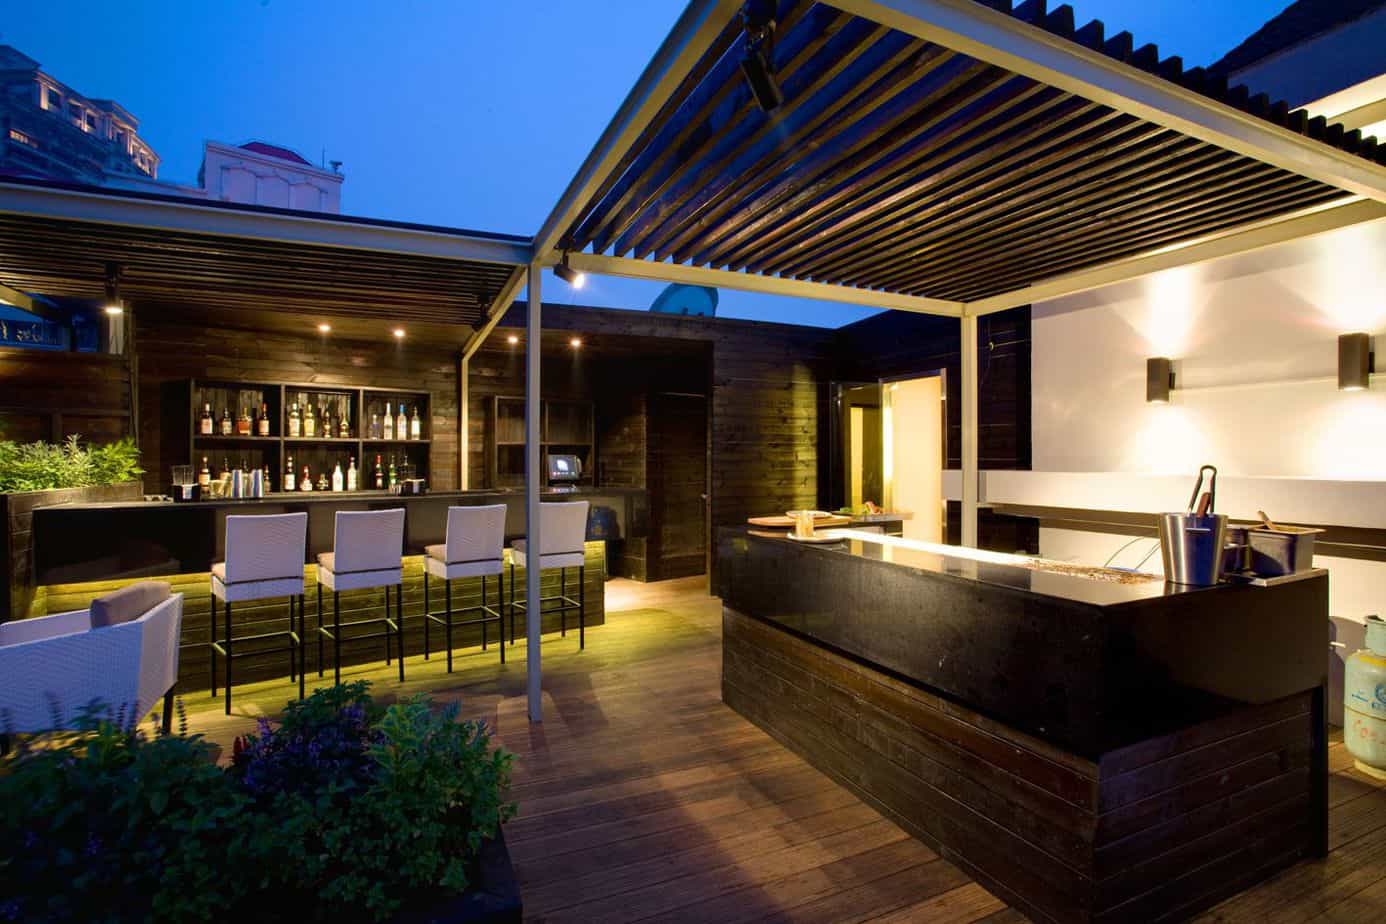 A secluded courtyard with cosy seating arrangement, pergola for shade, and a garden bar for entertainment